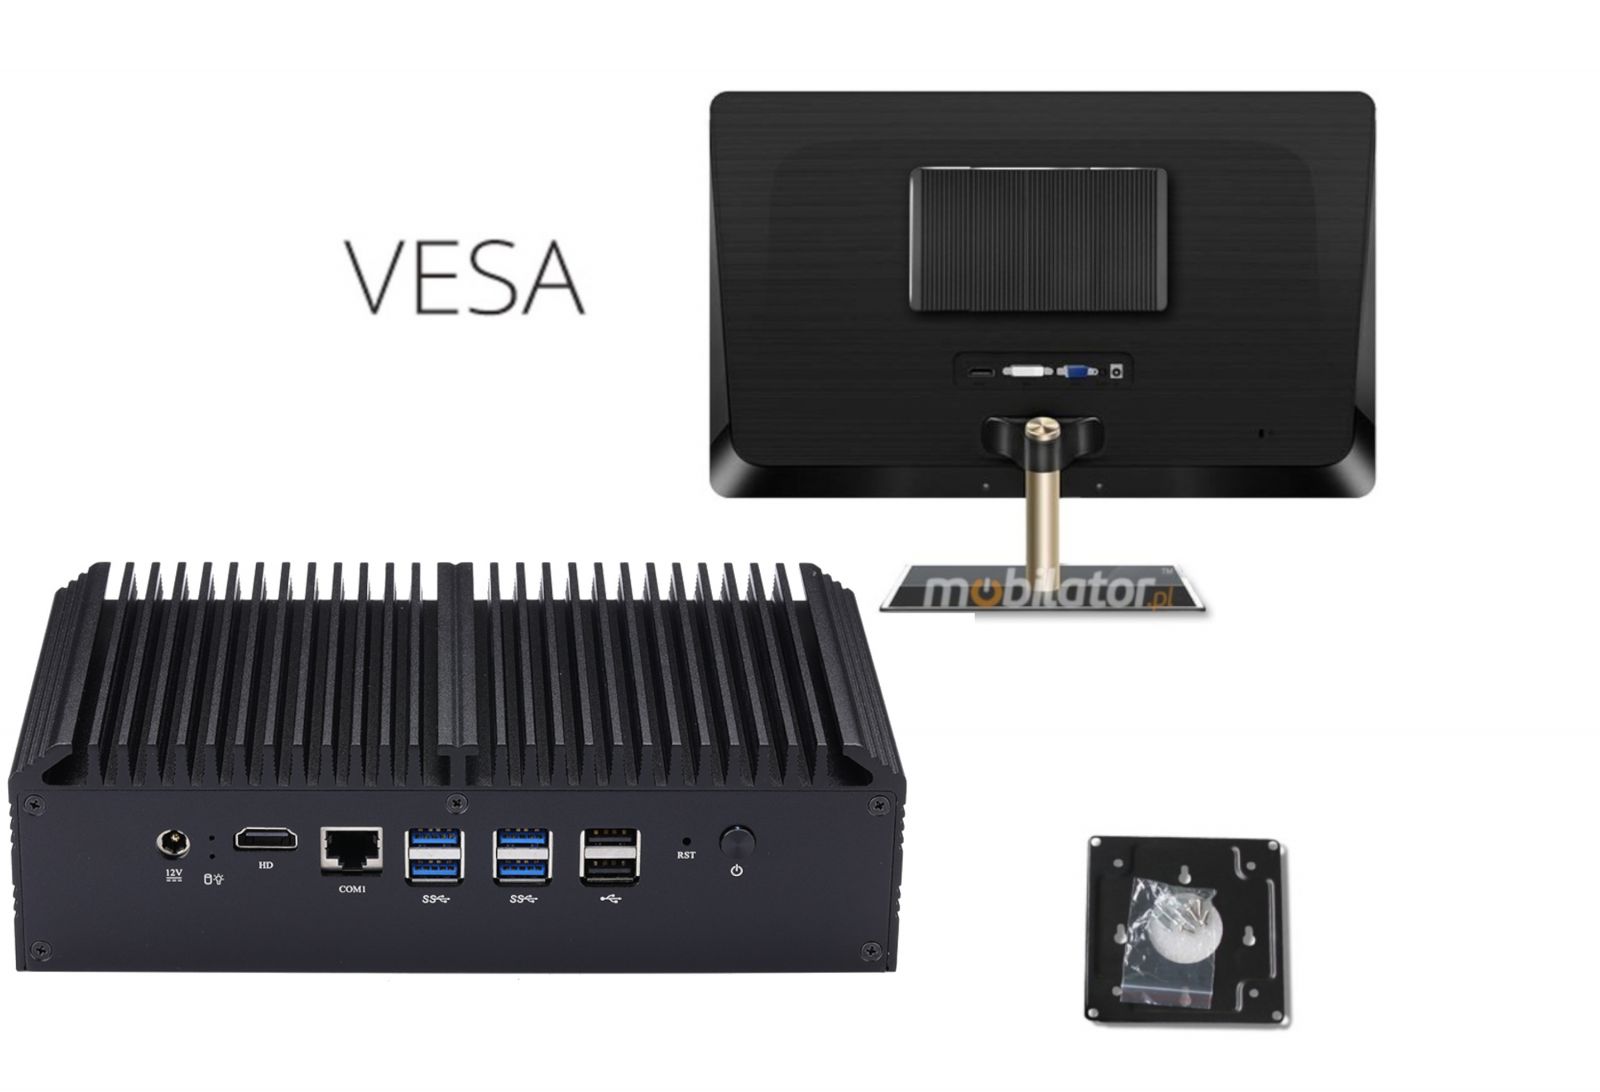 Handy VESA holder supports the mounting of the Q838GE on machine surfaces